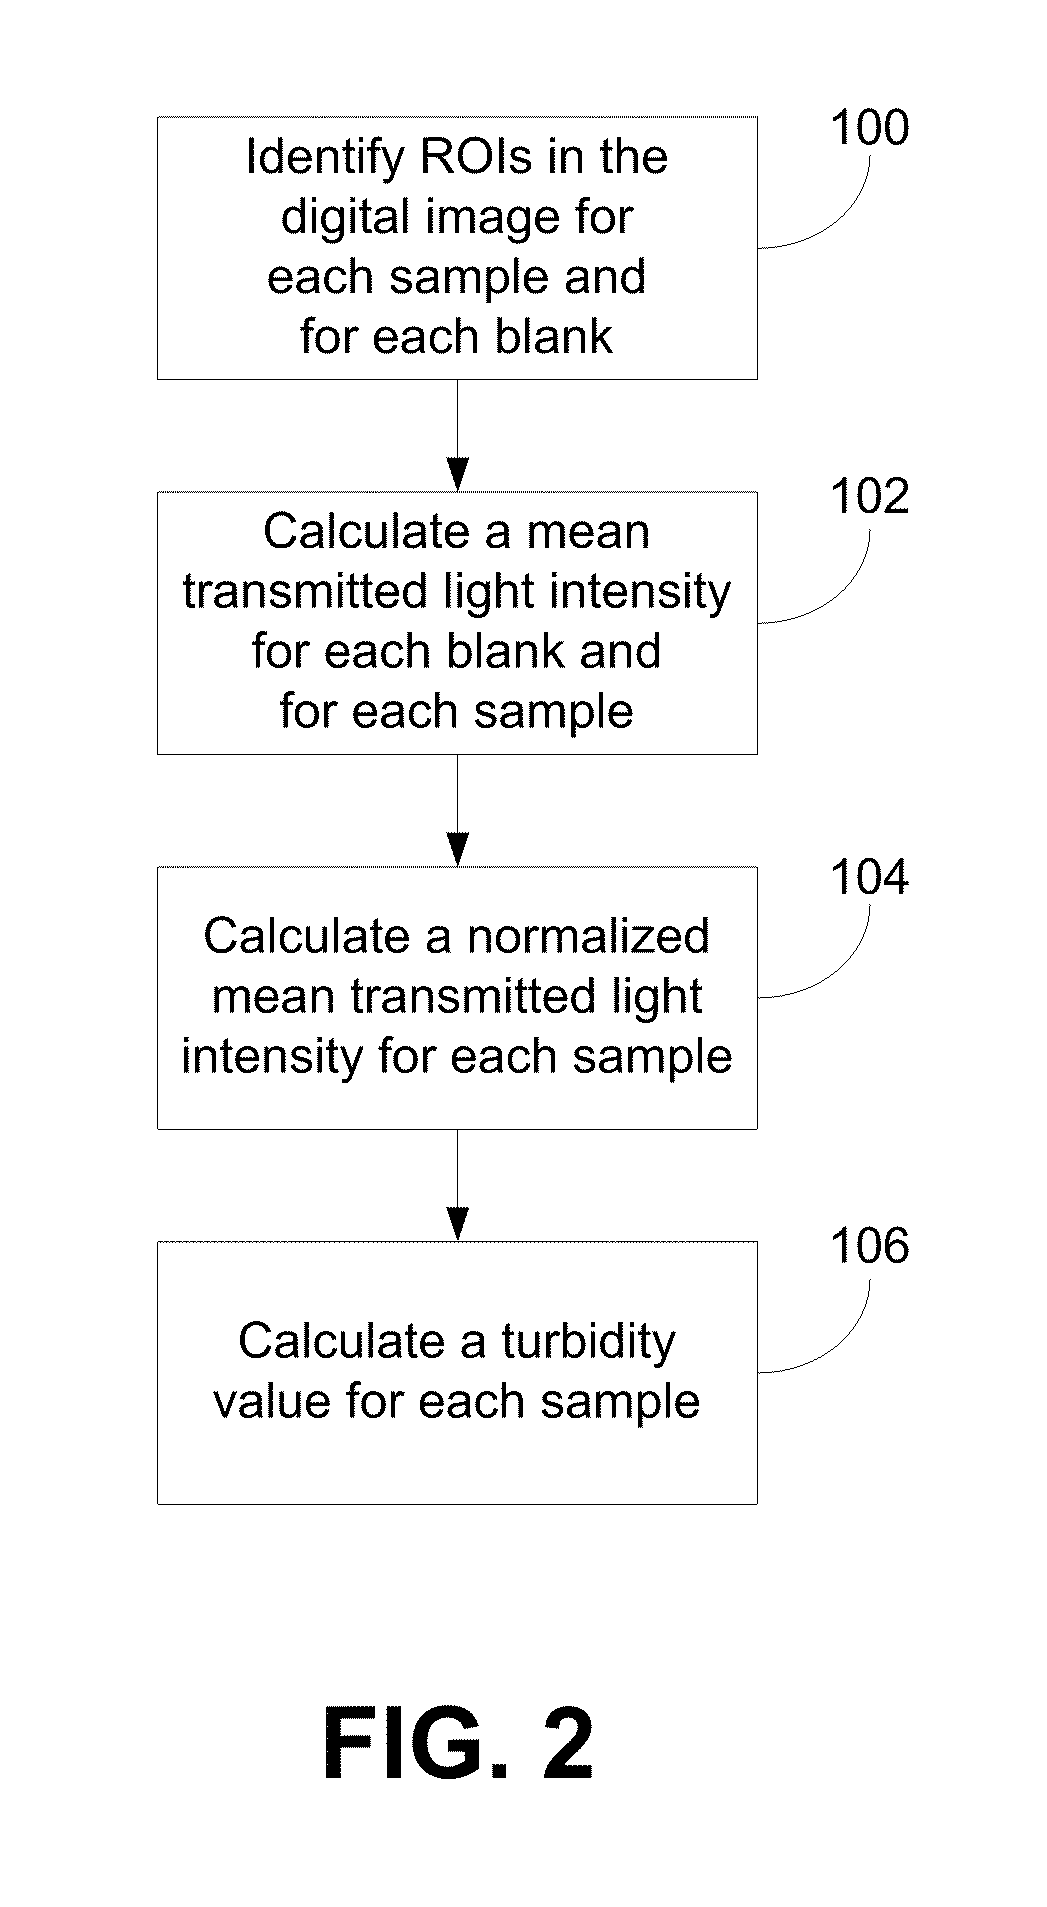 Systems and Methods for High-Throughput Turbidity Measurements